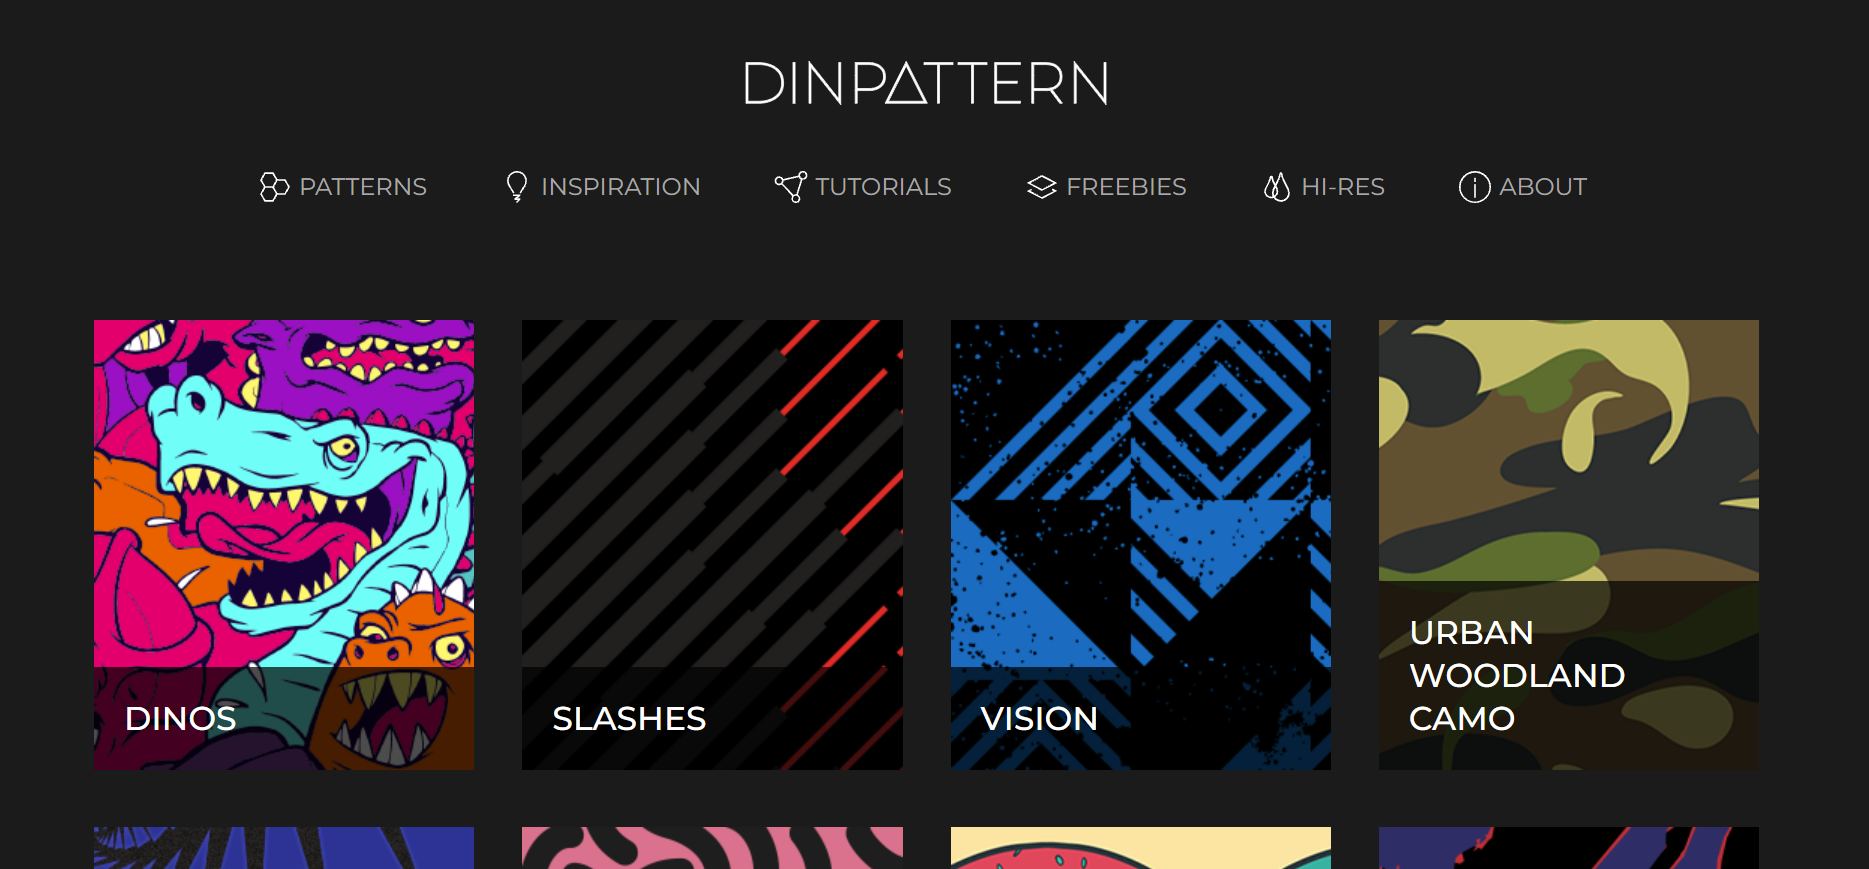 The DinPattern homepage.